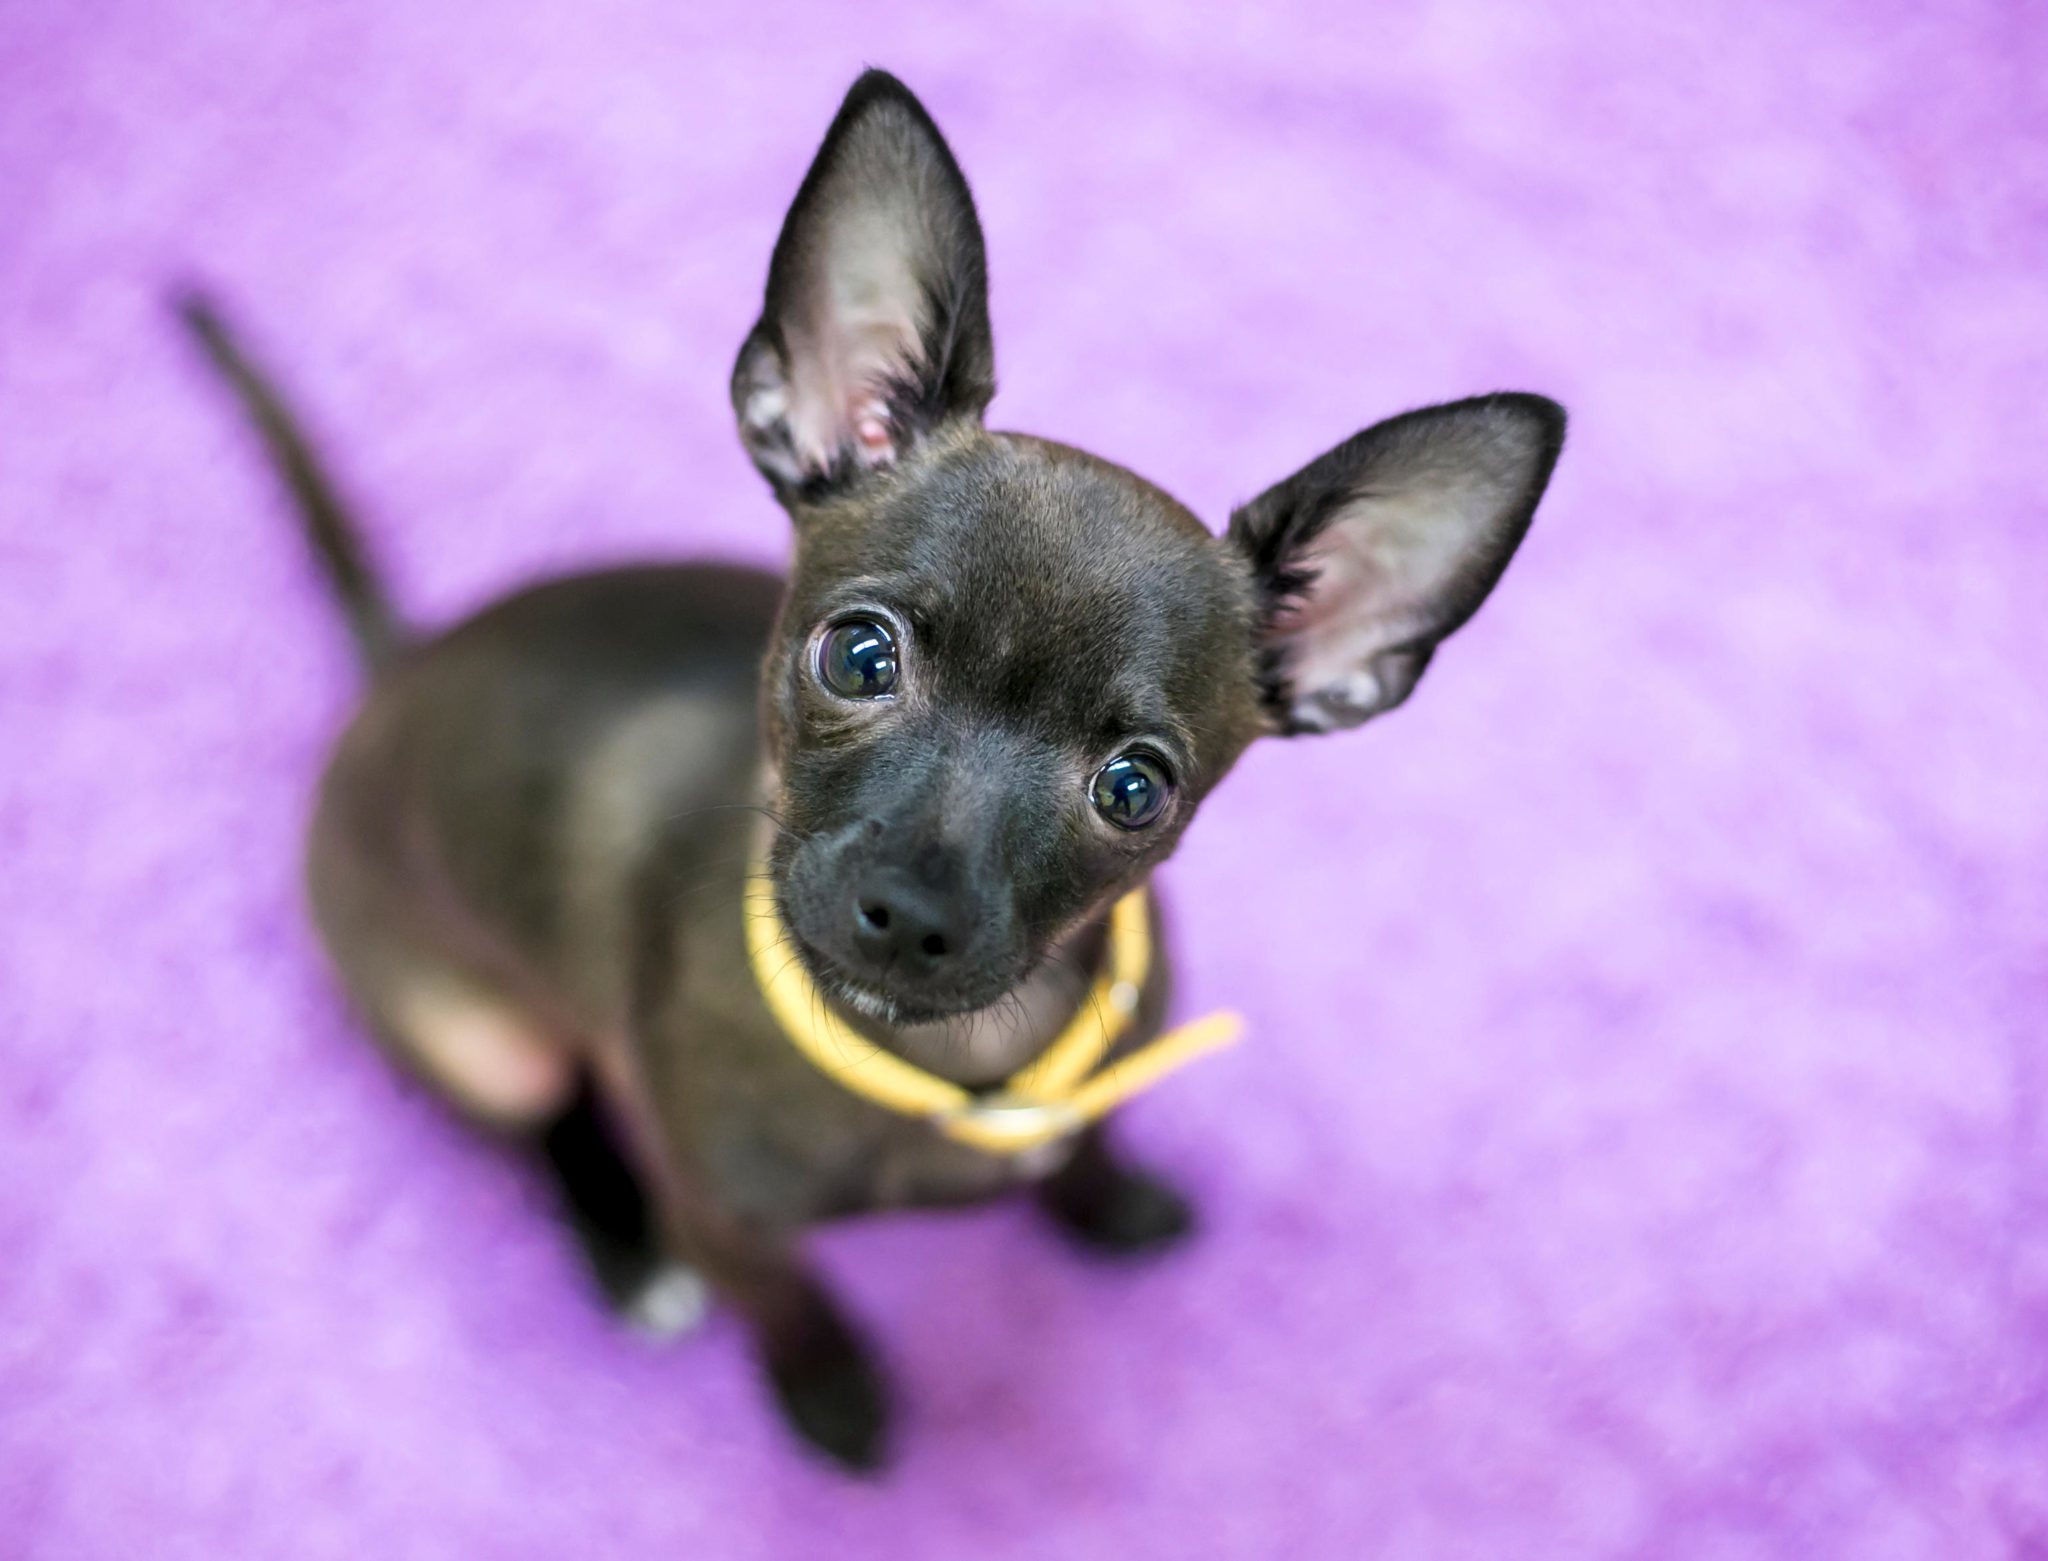 A black Chihuahua puppy wearing a yellow collar.